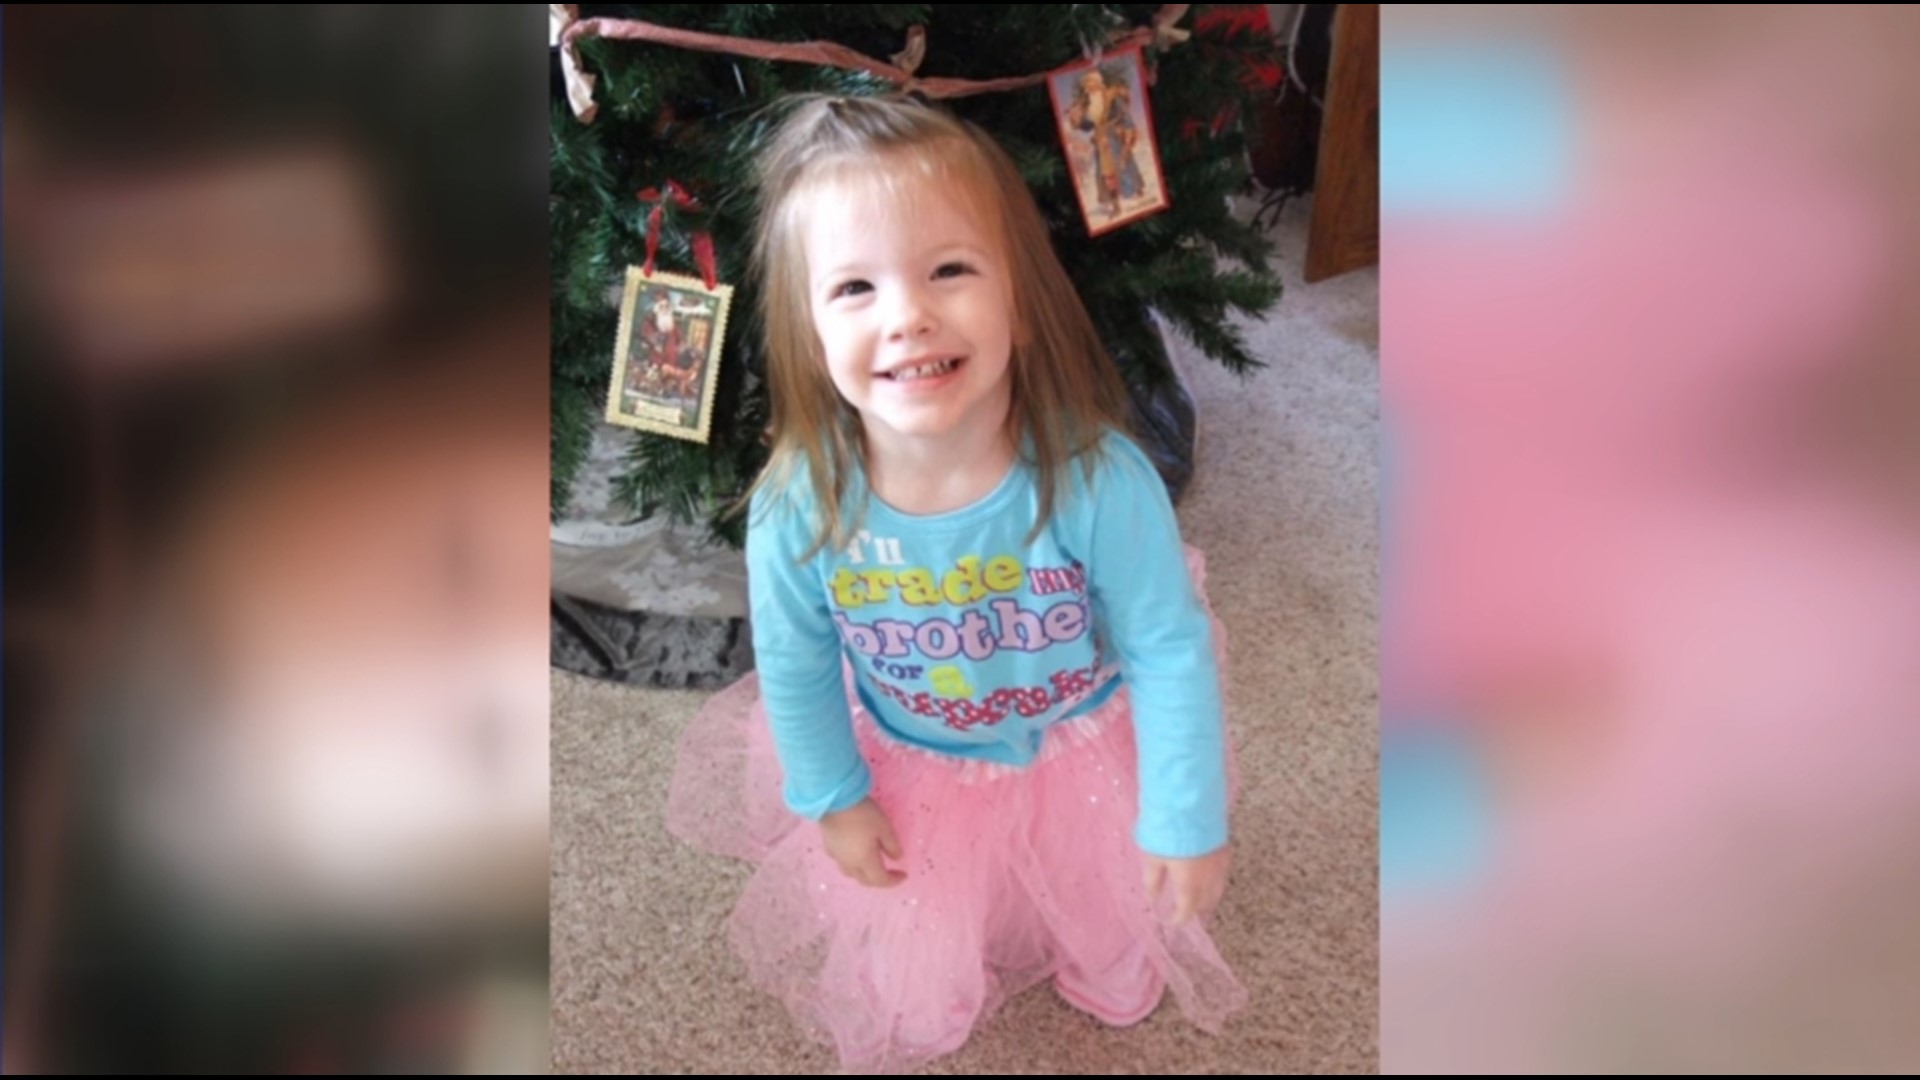 "I never would've in a million years dreamed a healthy 3-year-old would pass away from the flu," said Amber McCarthy, who lost her daughter to the flu.